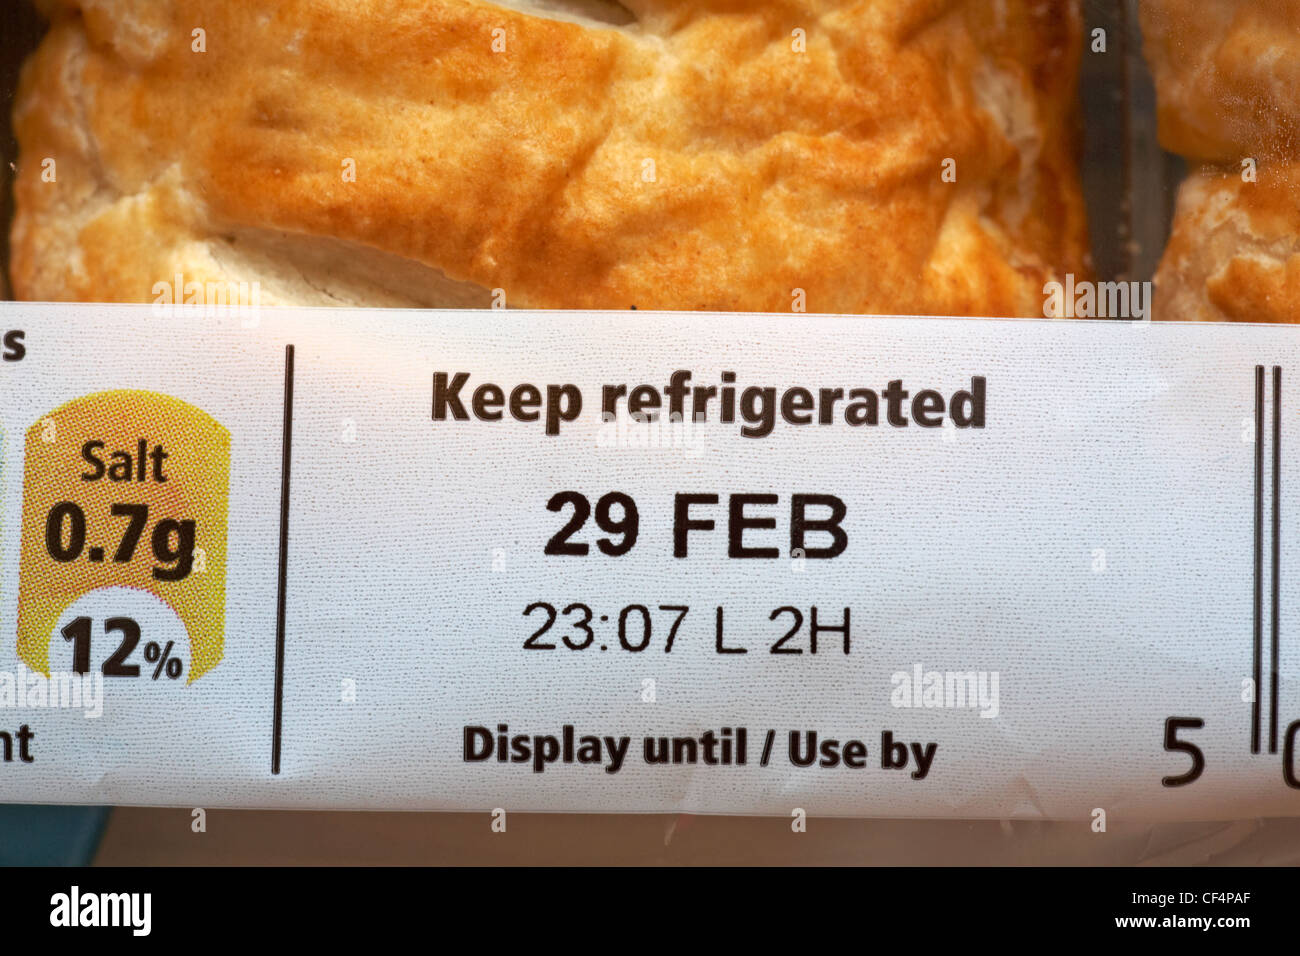 display until use by 29 Feb keep refrigerated advice on packet of sausage rolls Stock Photo